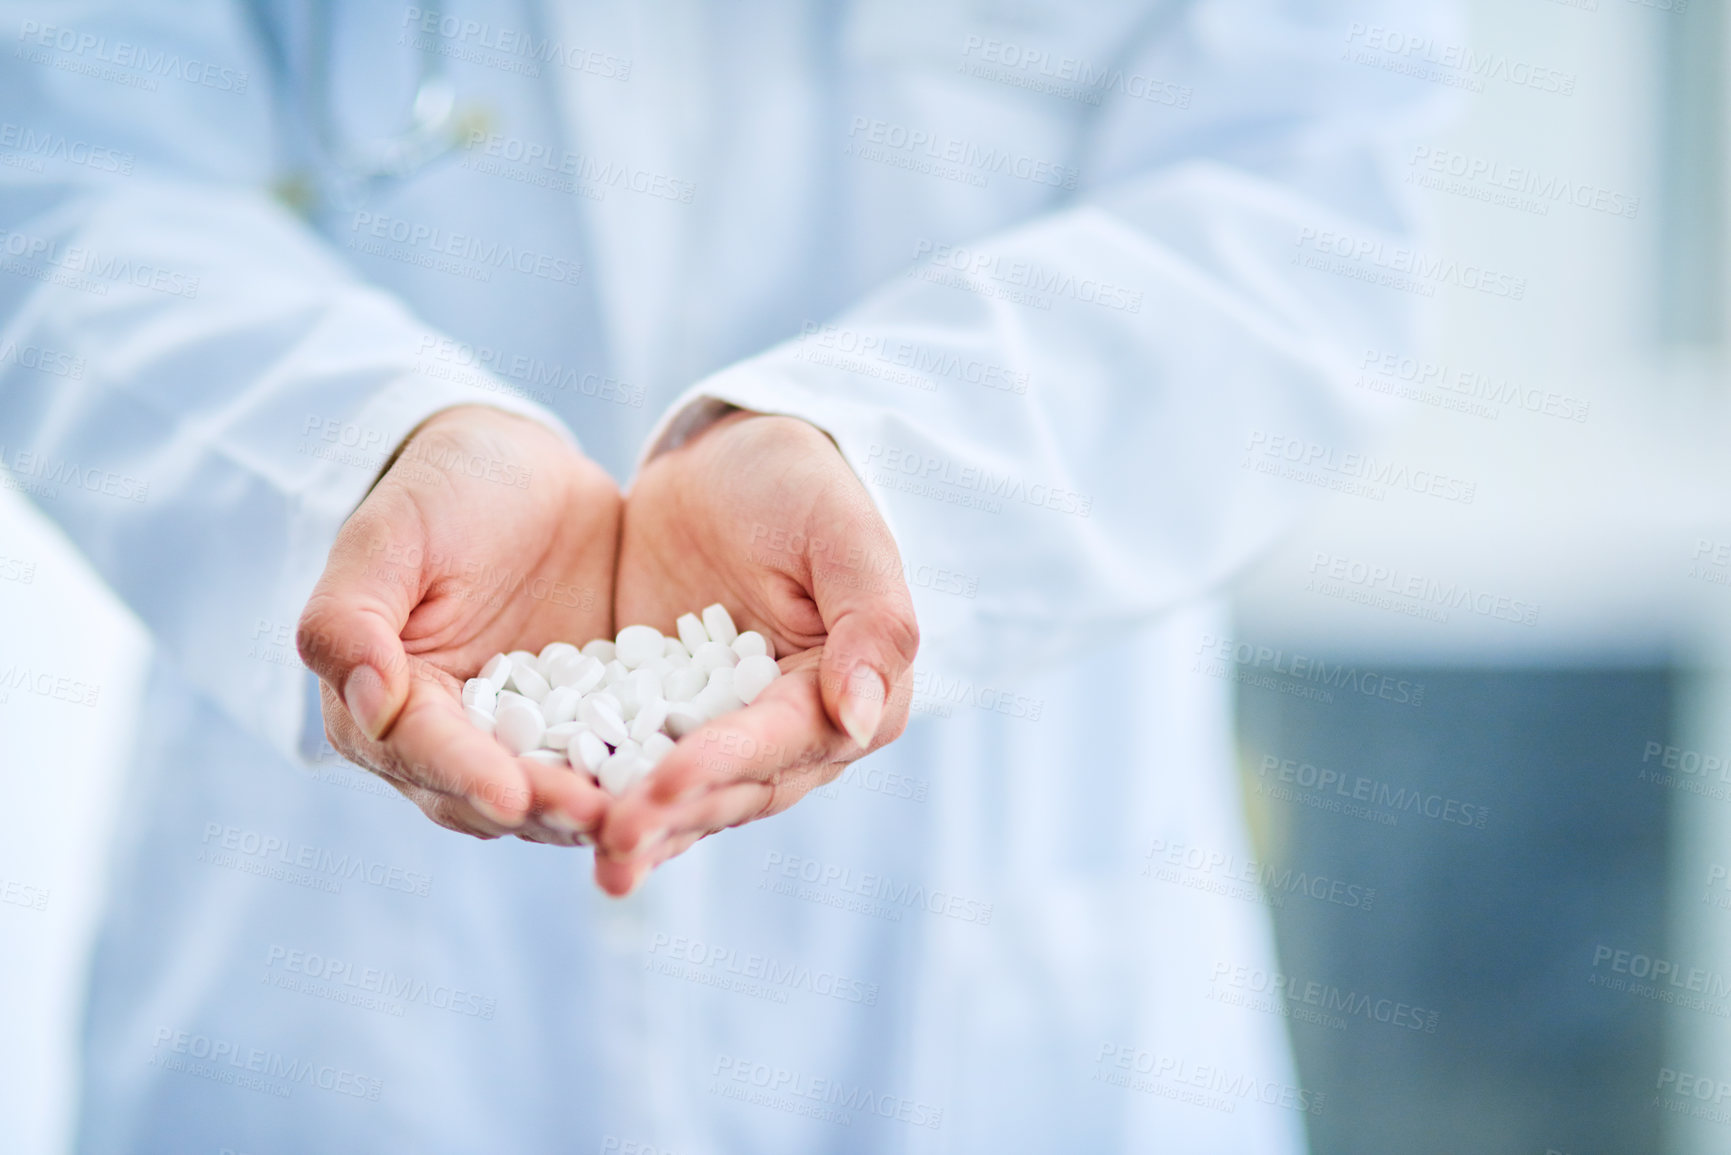 Buy stock photo Closeup shot of an unidentifiable doctor holding a variety of pills in her hands